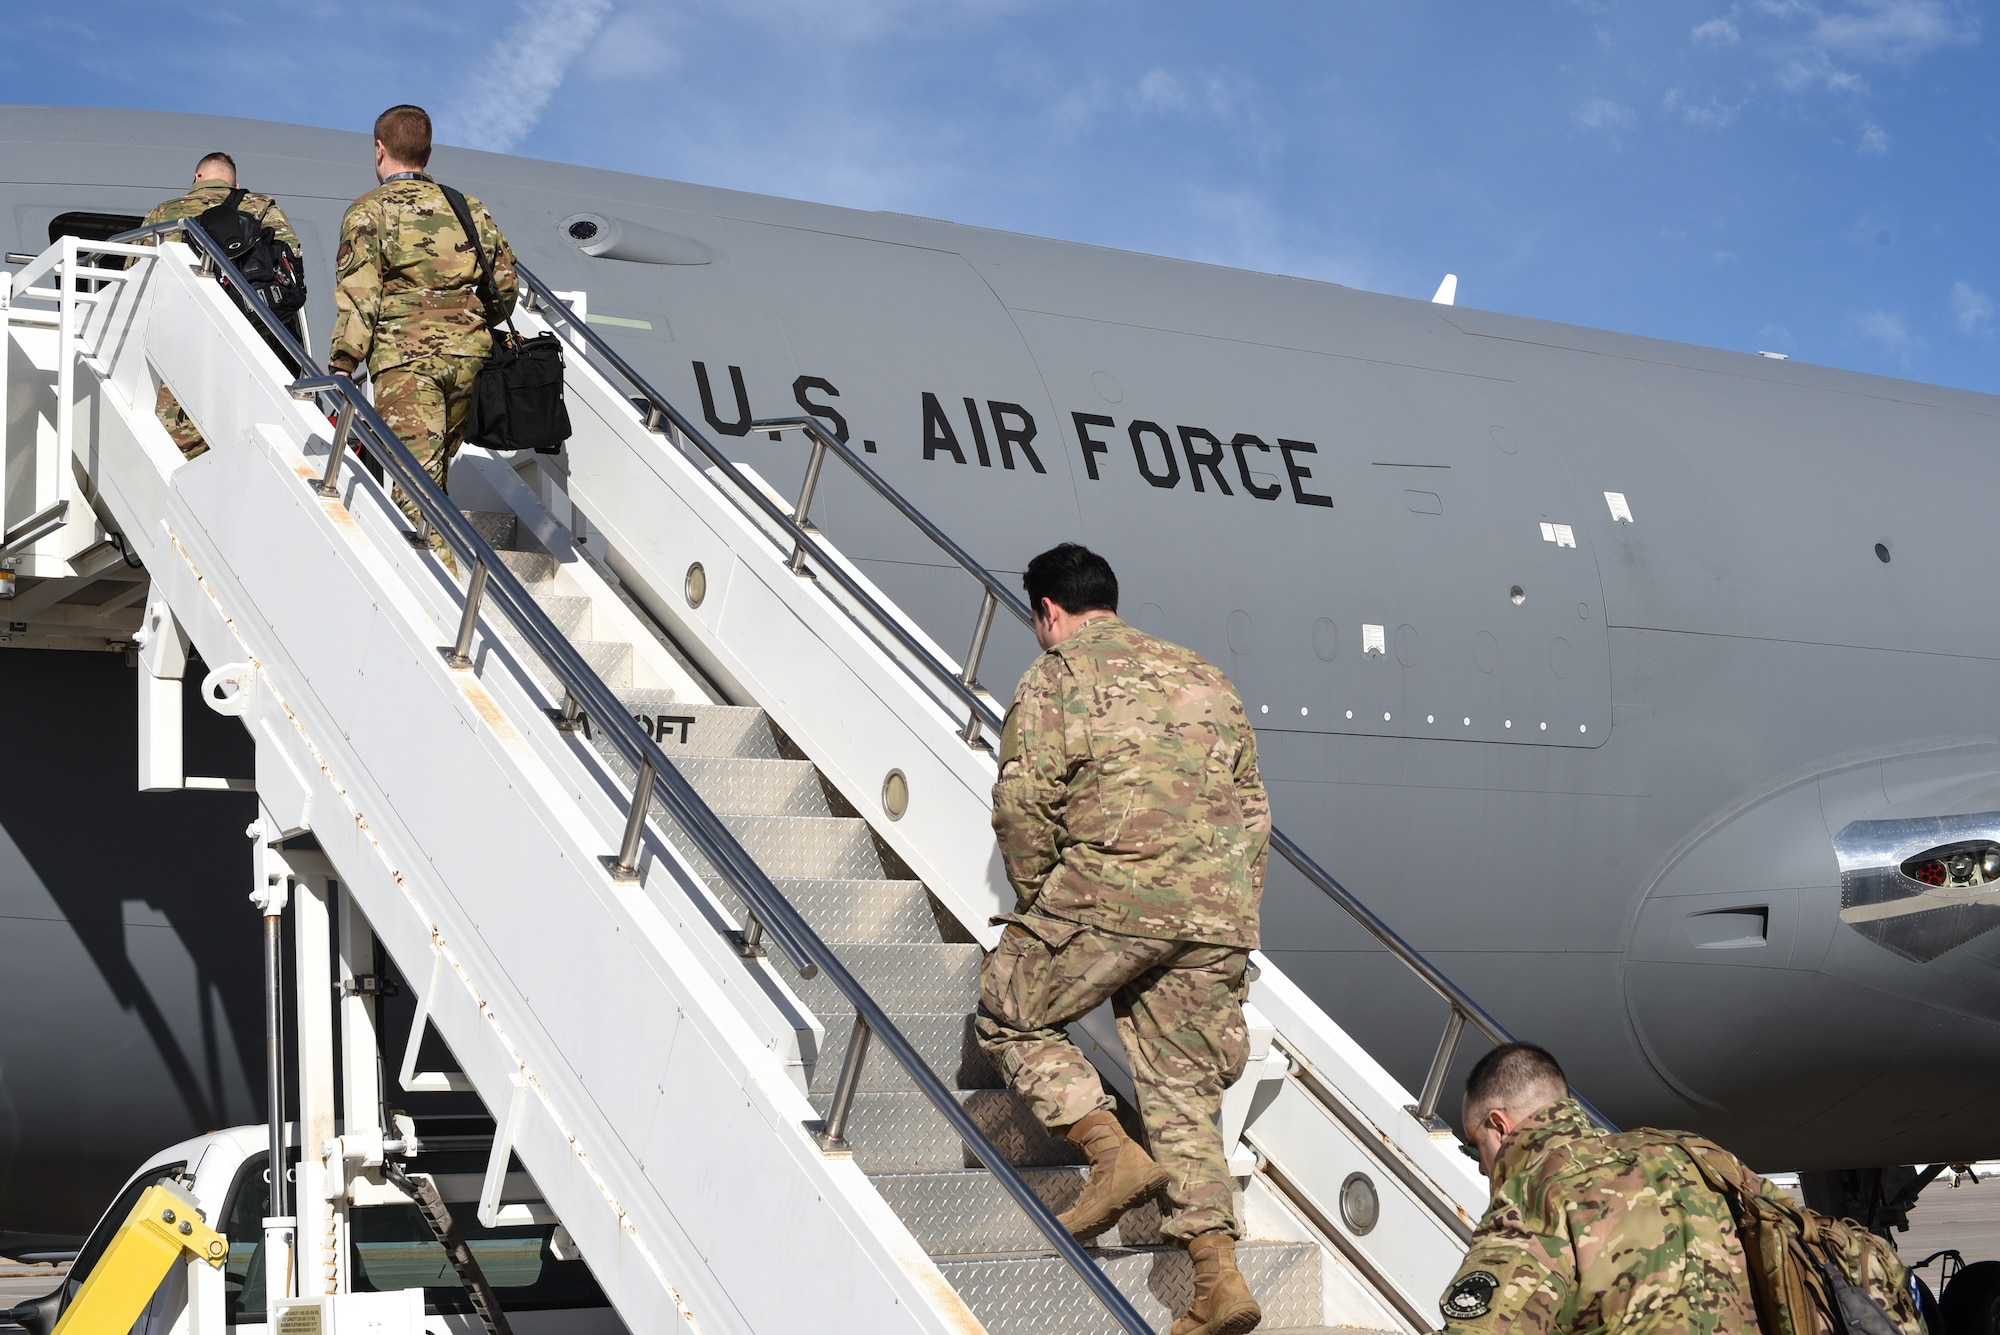 A KC-46A Pegasus aircrew assigned to the 344th Air Refueling Squadron boards a KC-46 to preform familiarization training Feb. 14, 2019, at McConnell Air Force Base, Kan. Familiarization training is comprised of four phases to help Team McConnell work out any potential kinks before being fully operational. (U.S. Air Force photo by Airman 1st Class Alexi Myrick)